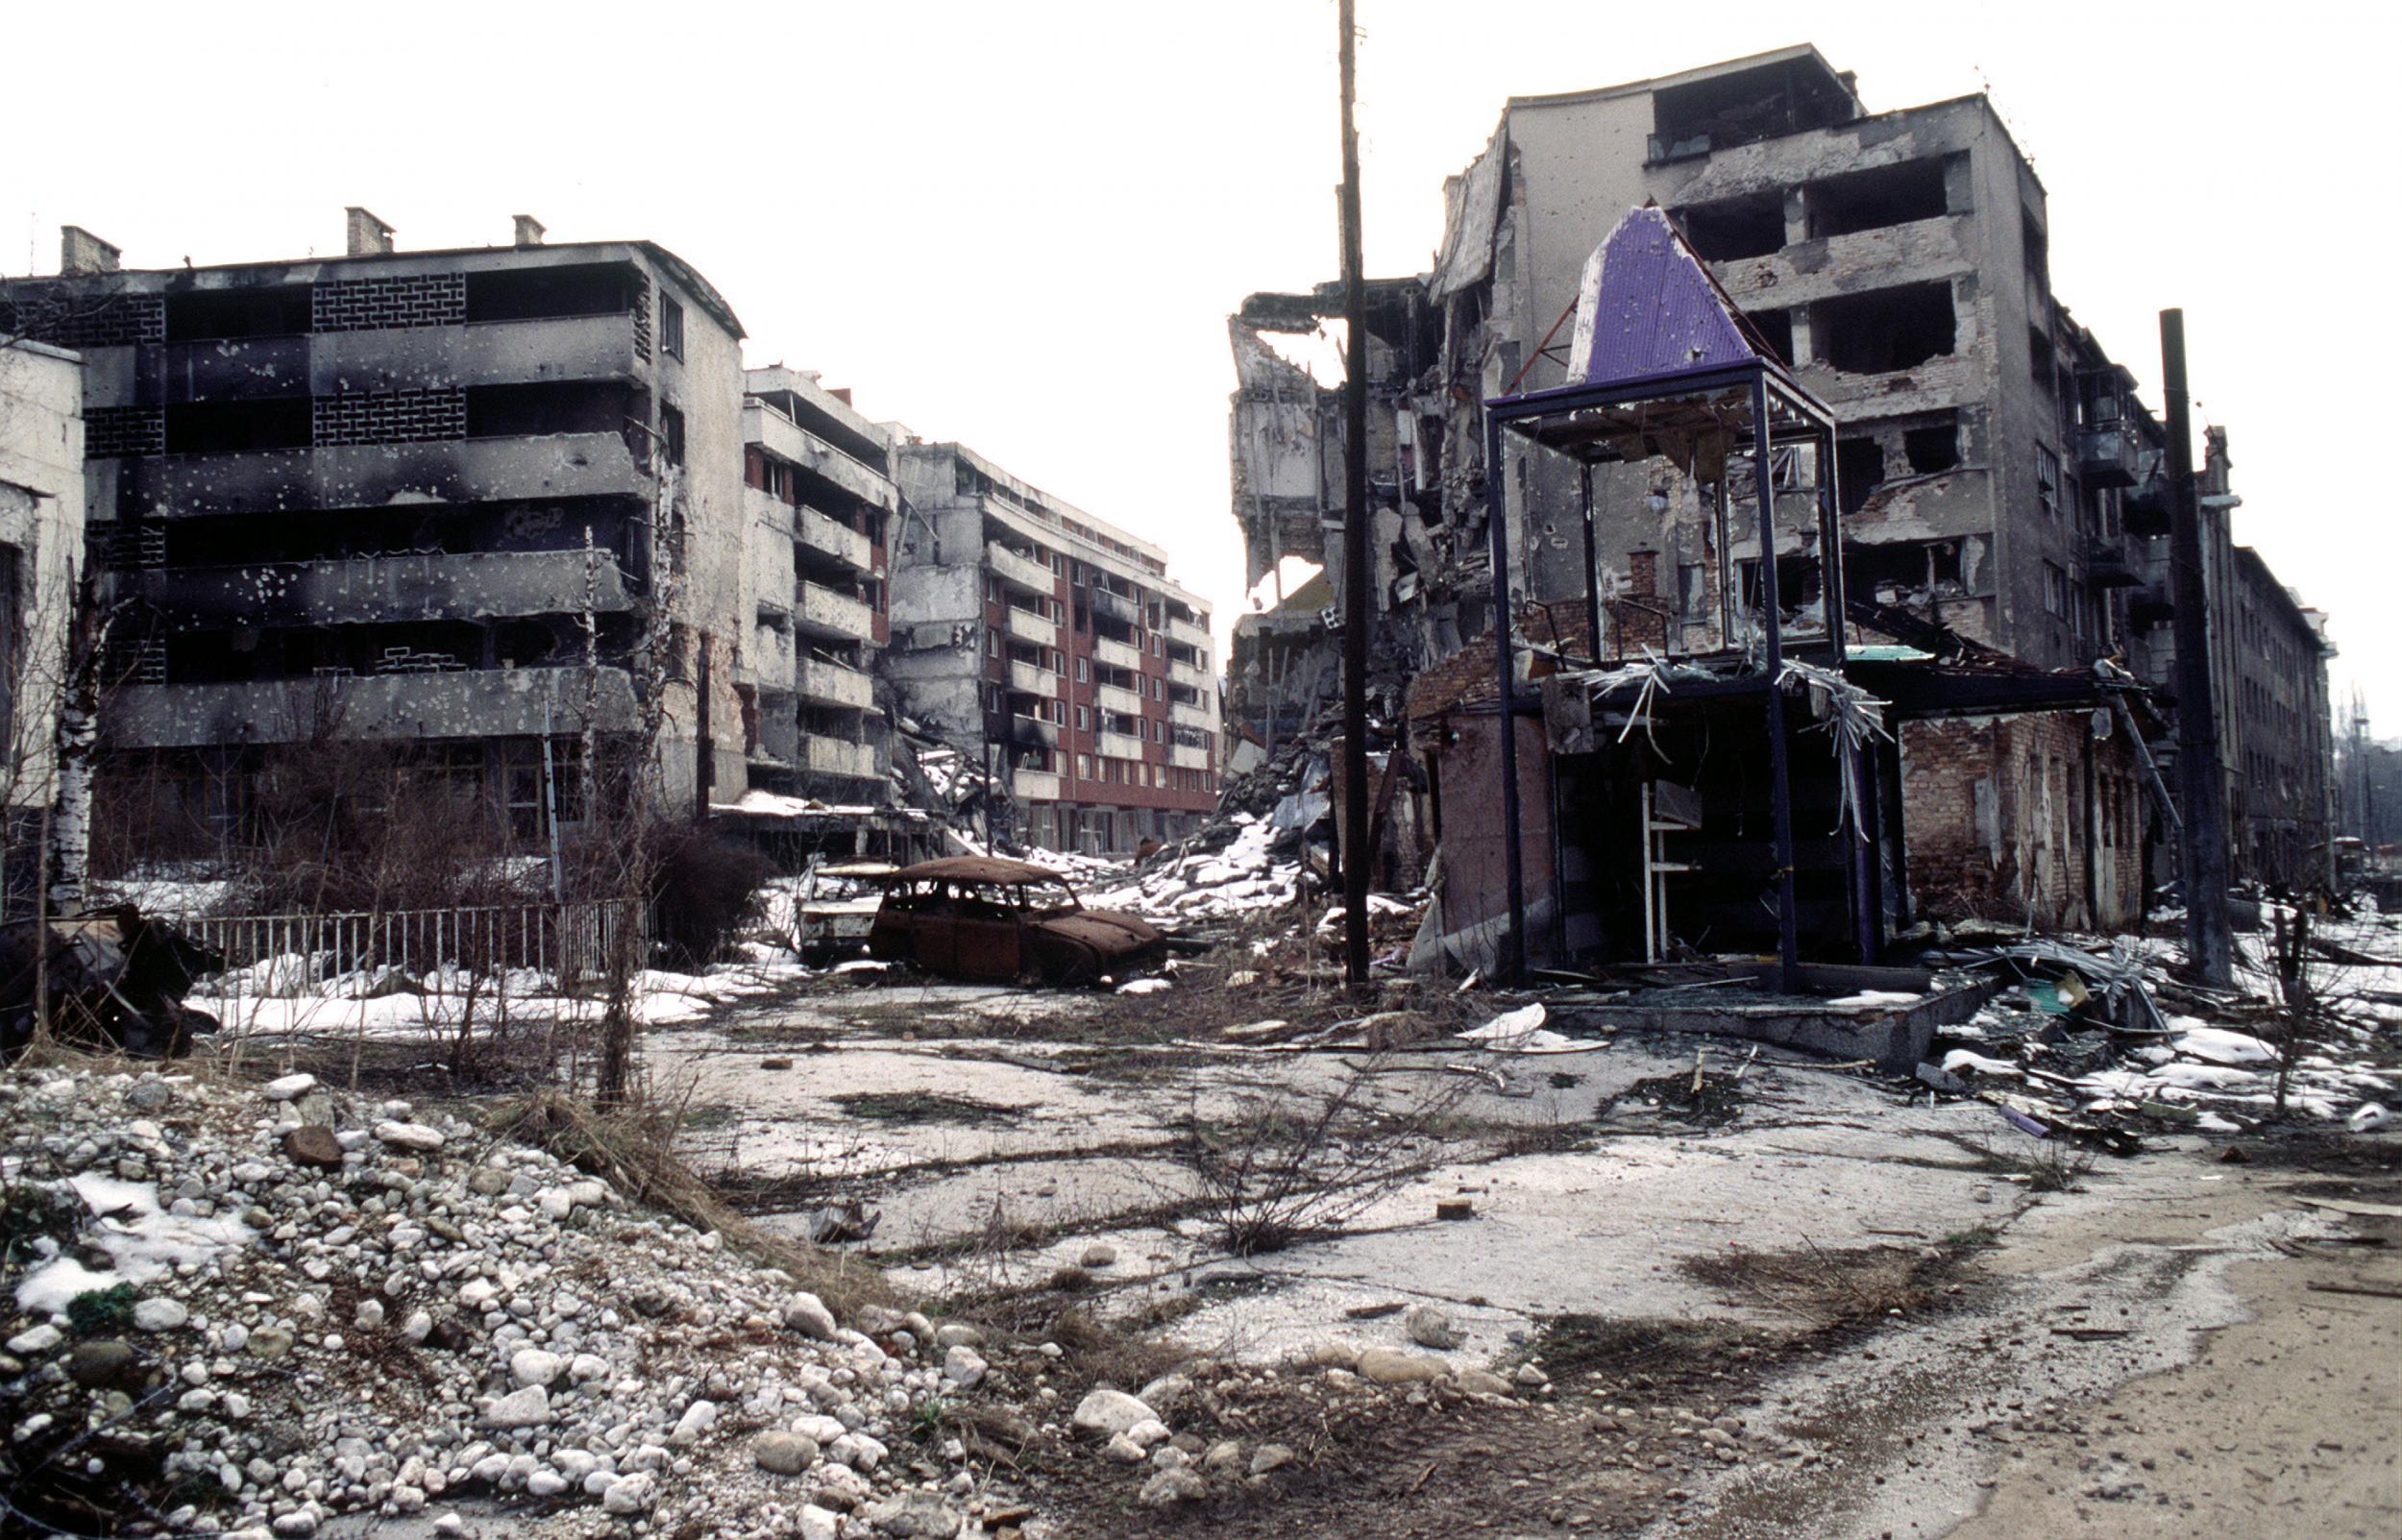 Sarajevo was besieged for four years during the Bosnian War, with many districts left in ruins